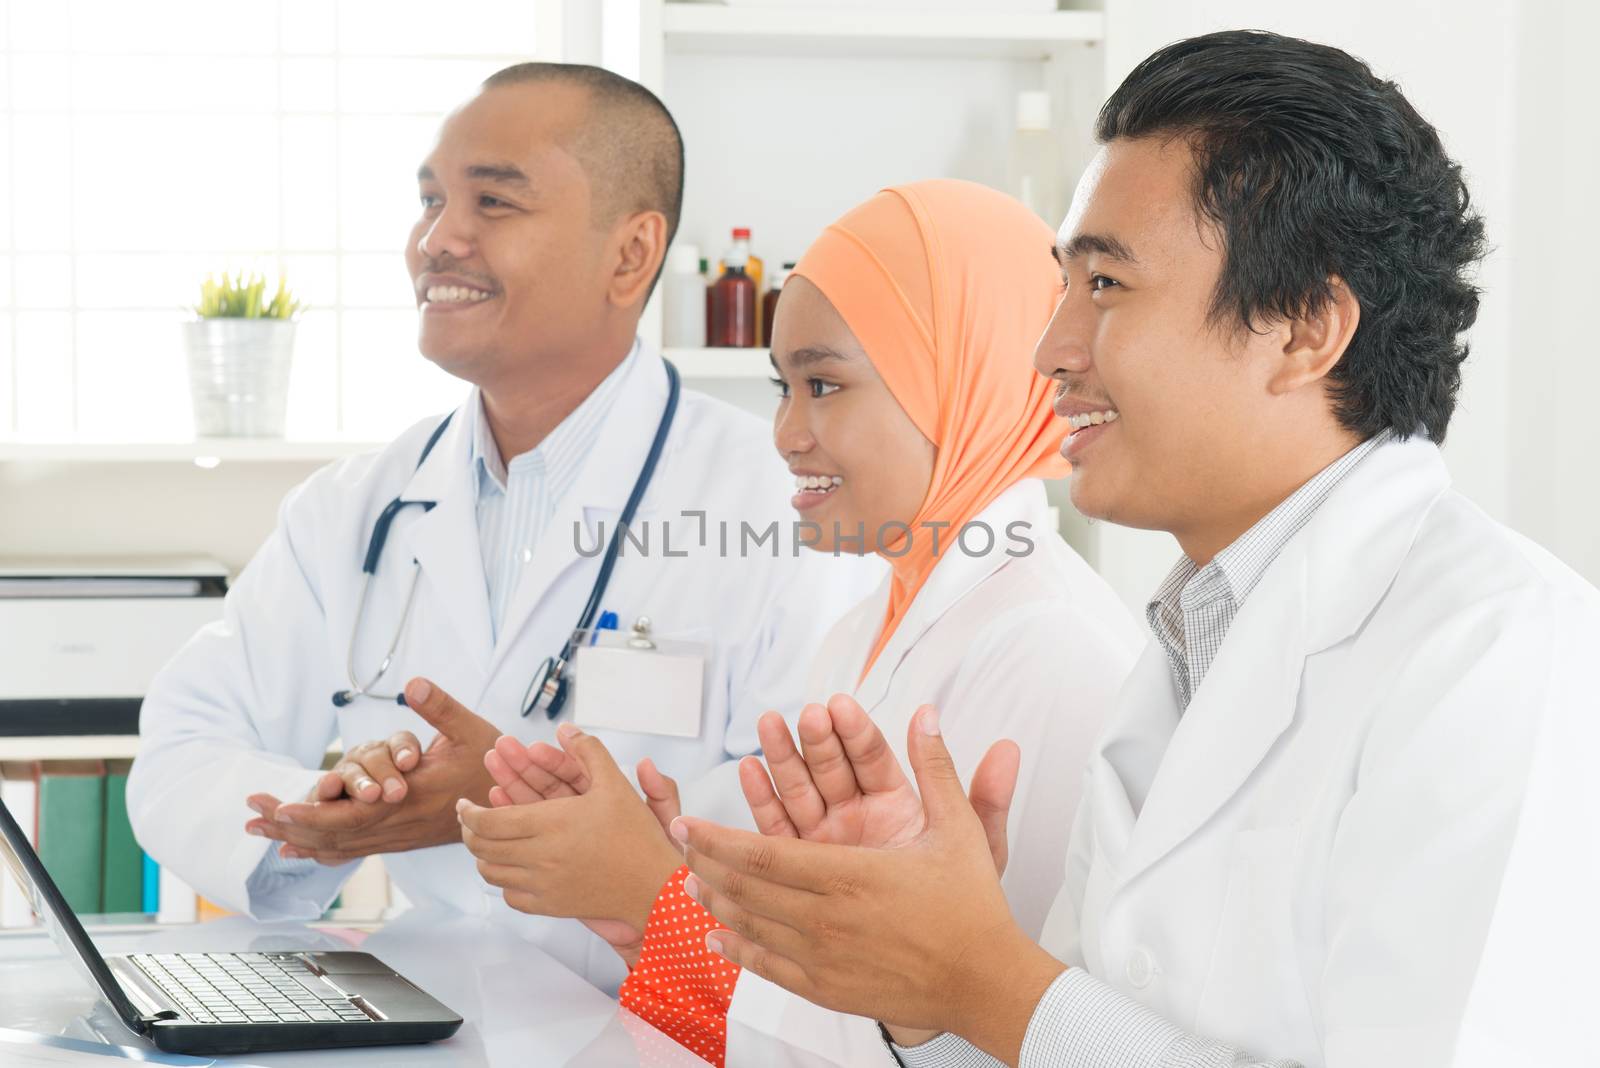 Joyful medical team clapping hands during a meeting, Southeast Asian Muslim doctors and nurses.